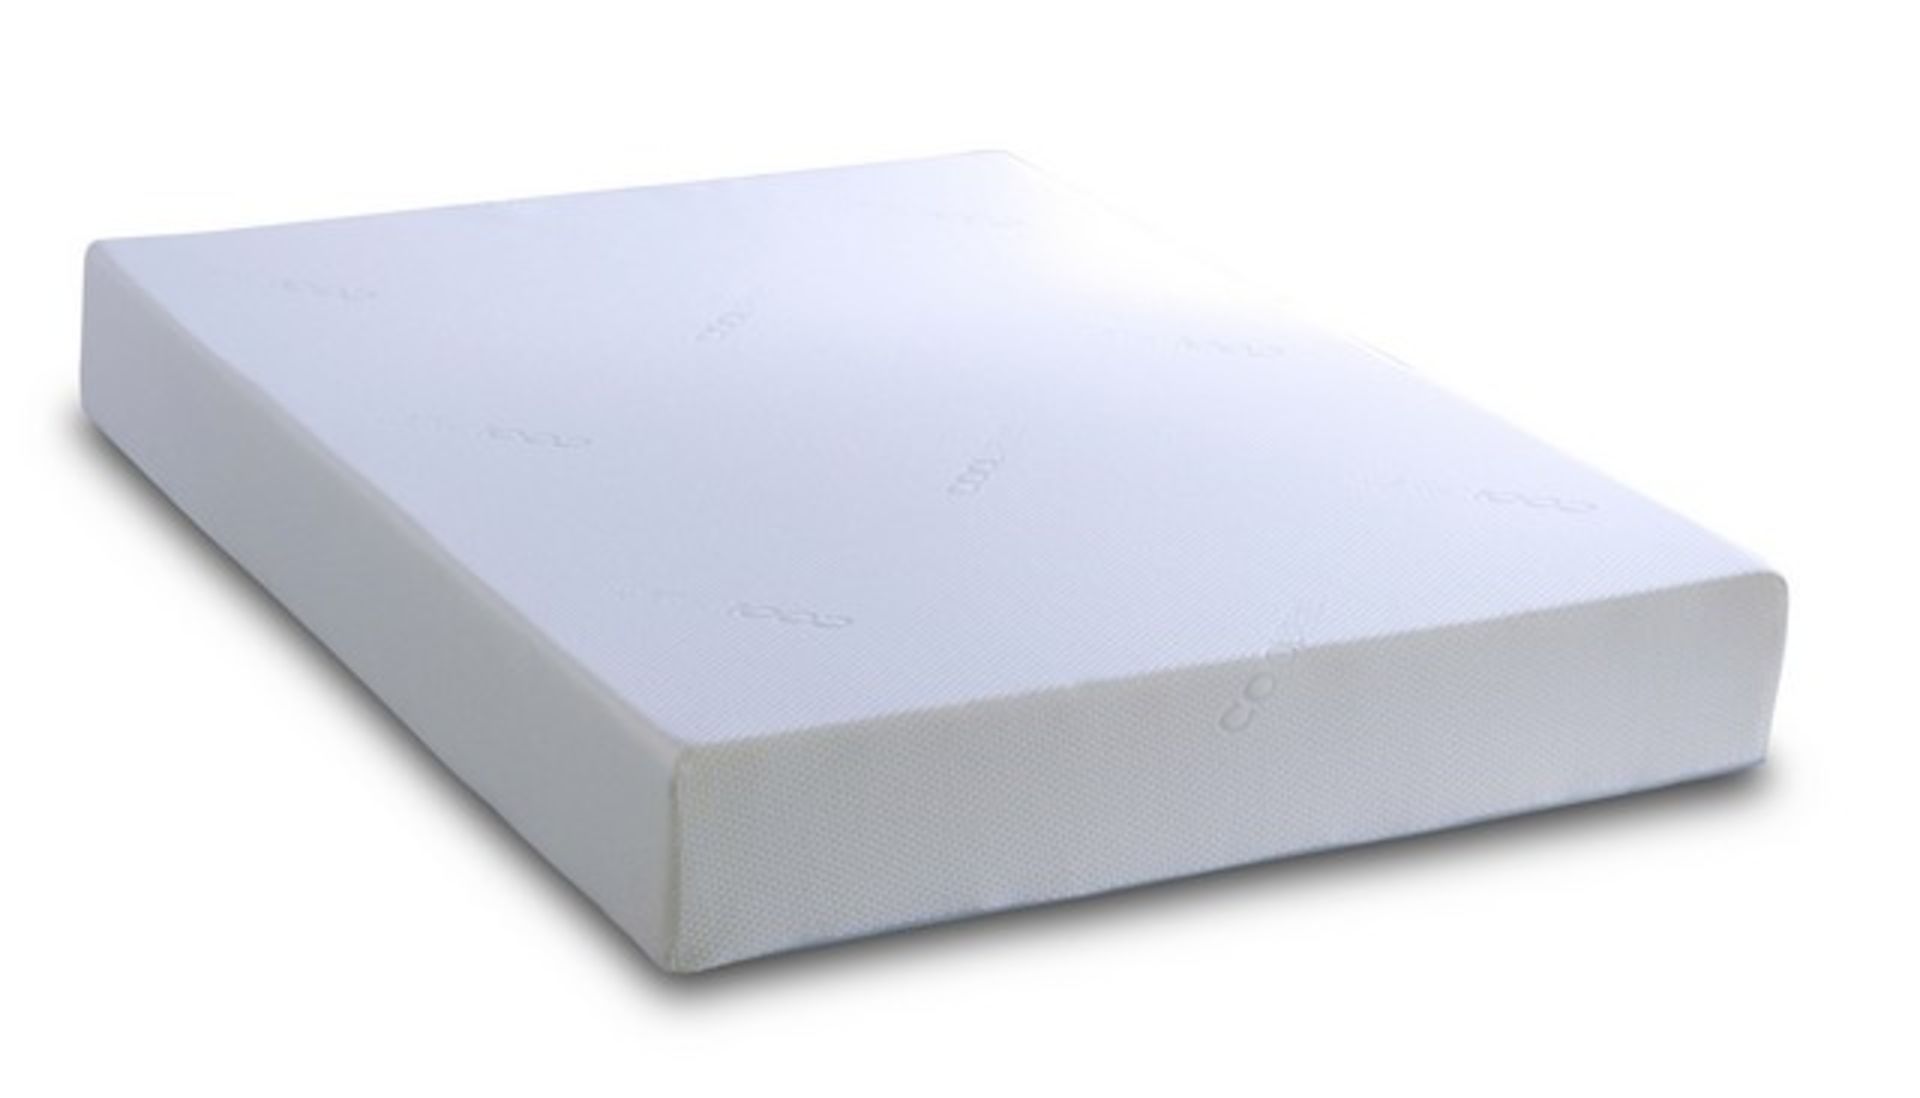 V Brand New King Size Memory Foam Mattress Rolled- Contours Your Body Shape - Suitable For